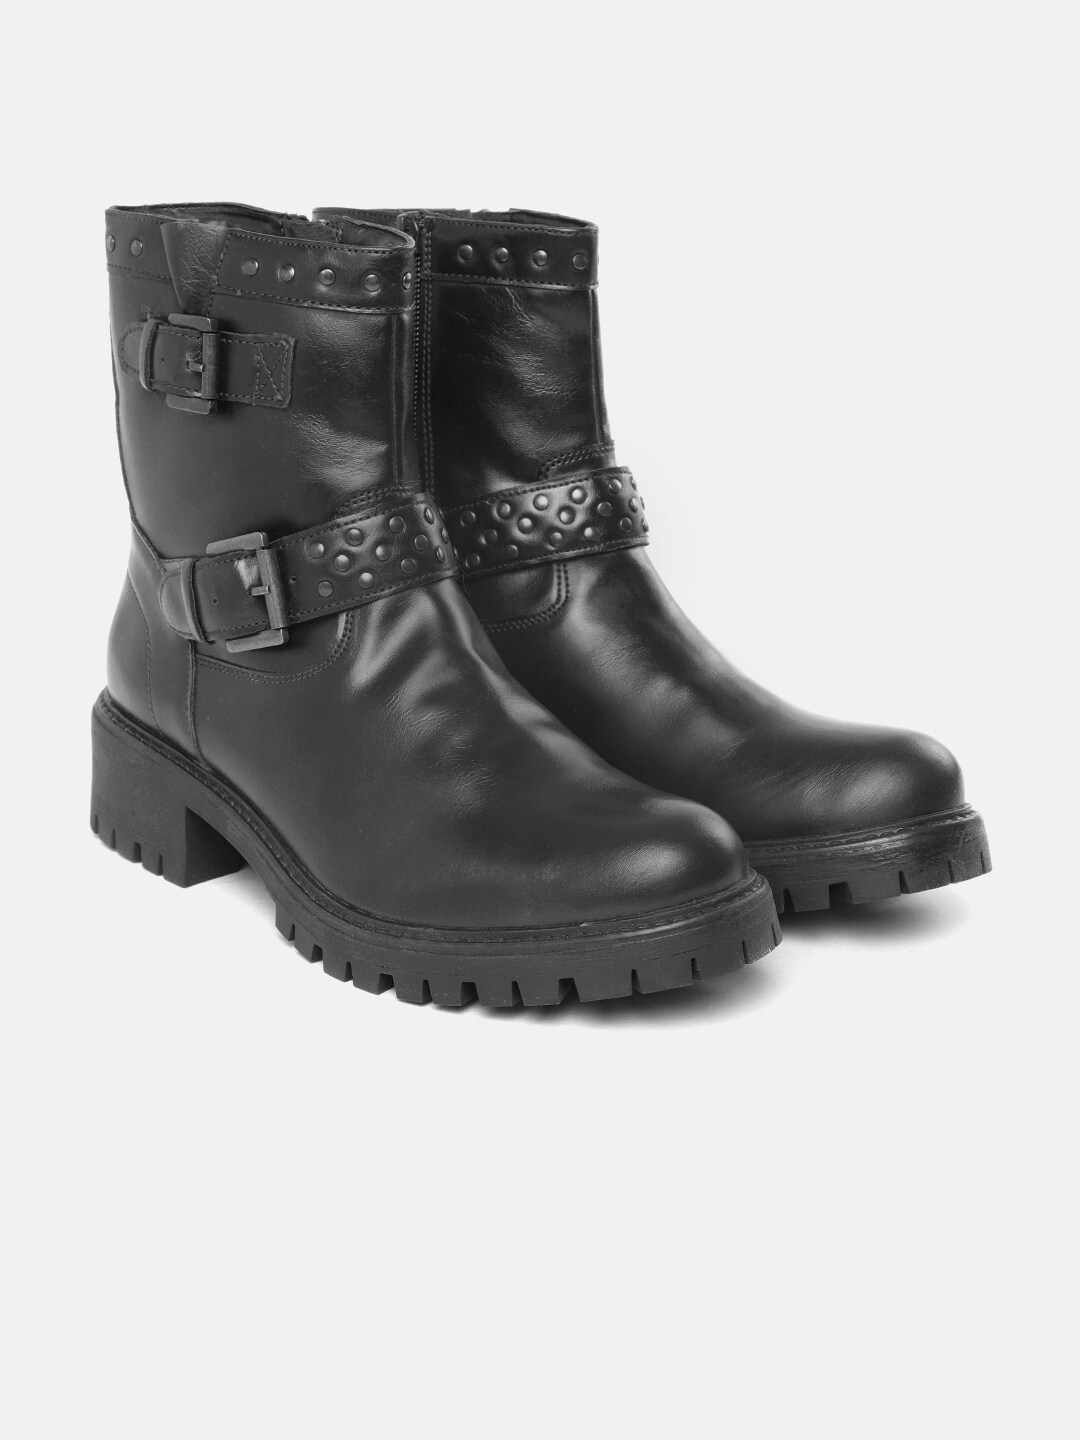 Roadster Black Block Heeled Boots with Buckles Price in India